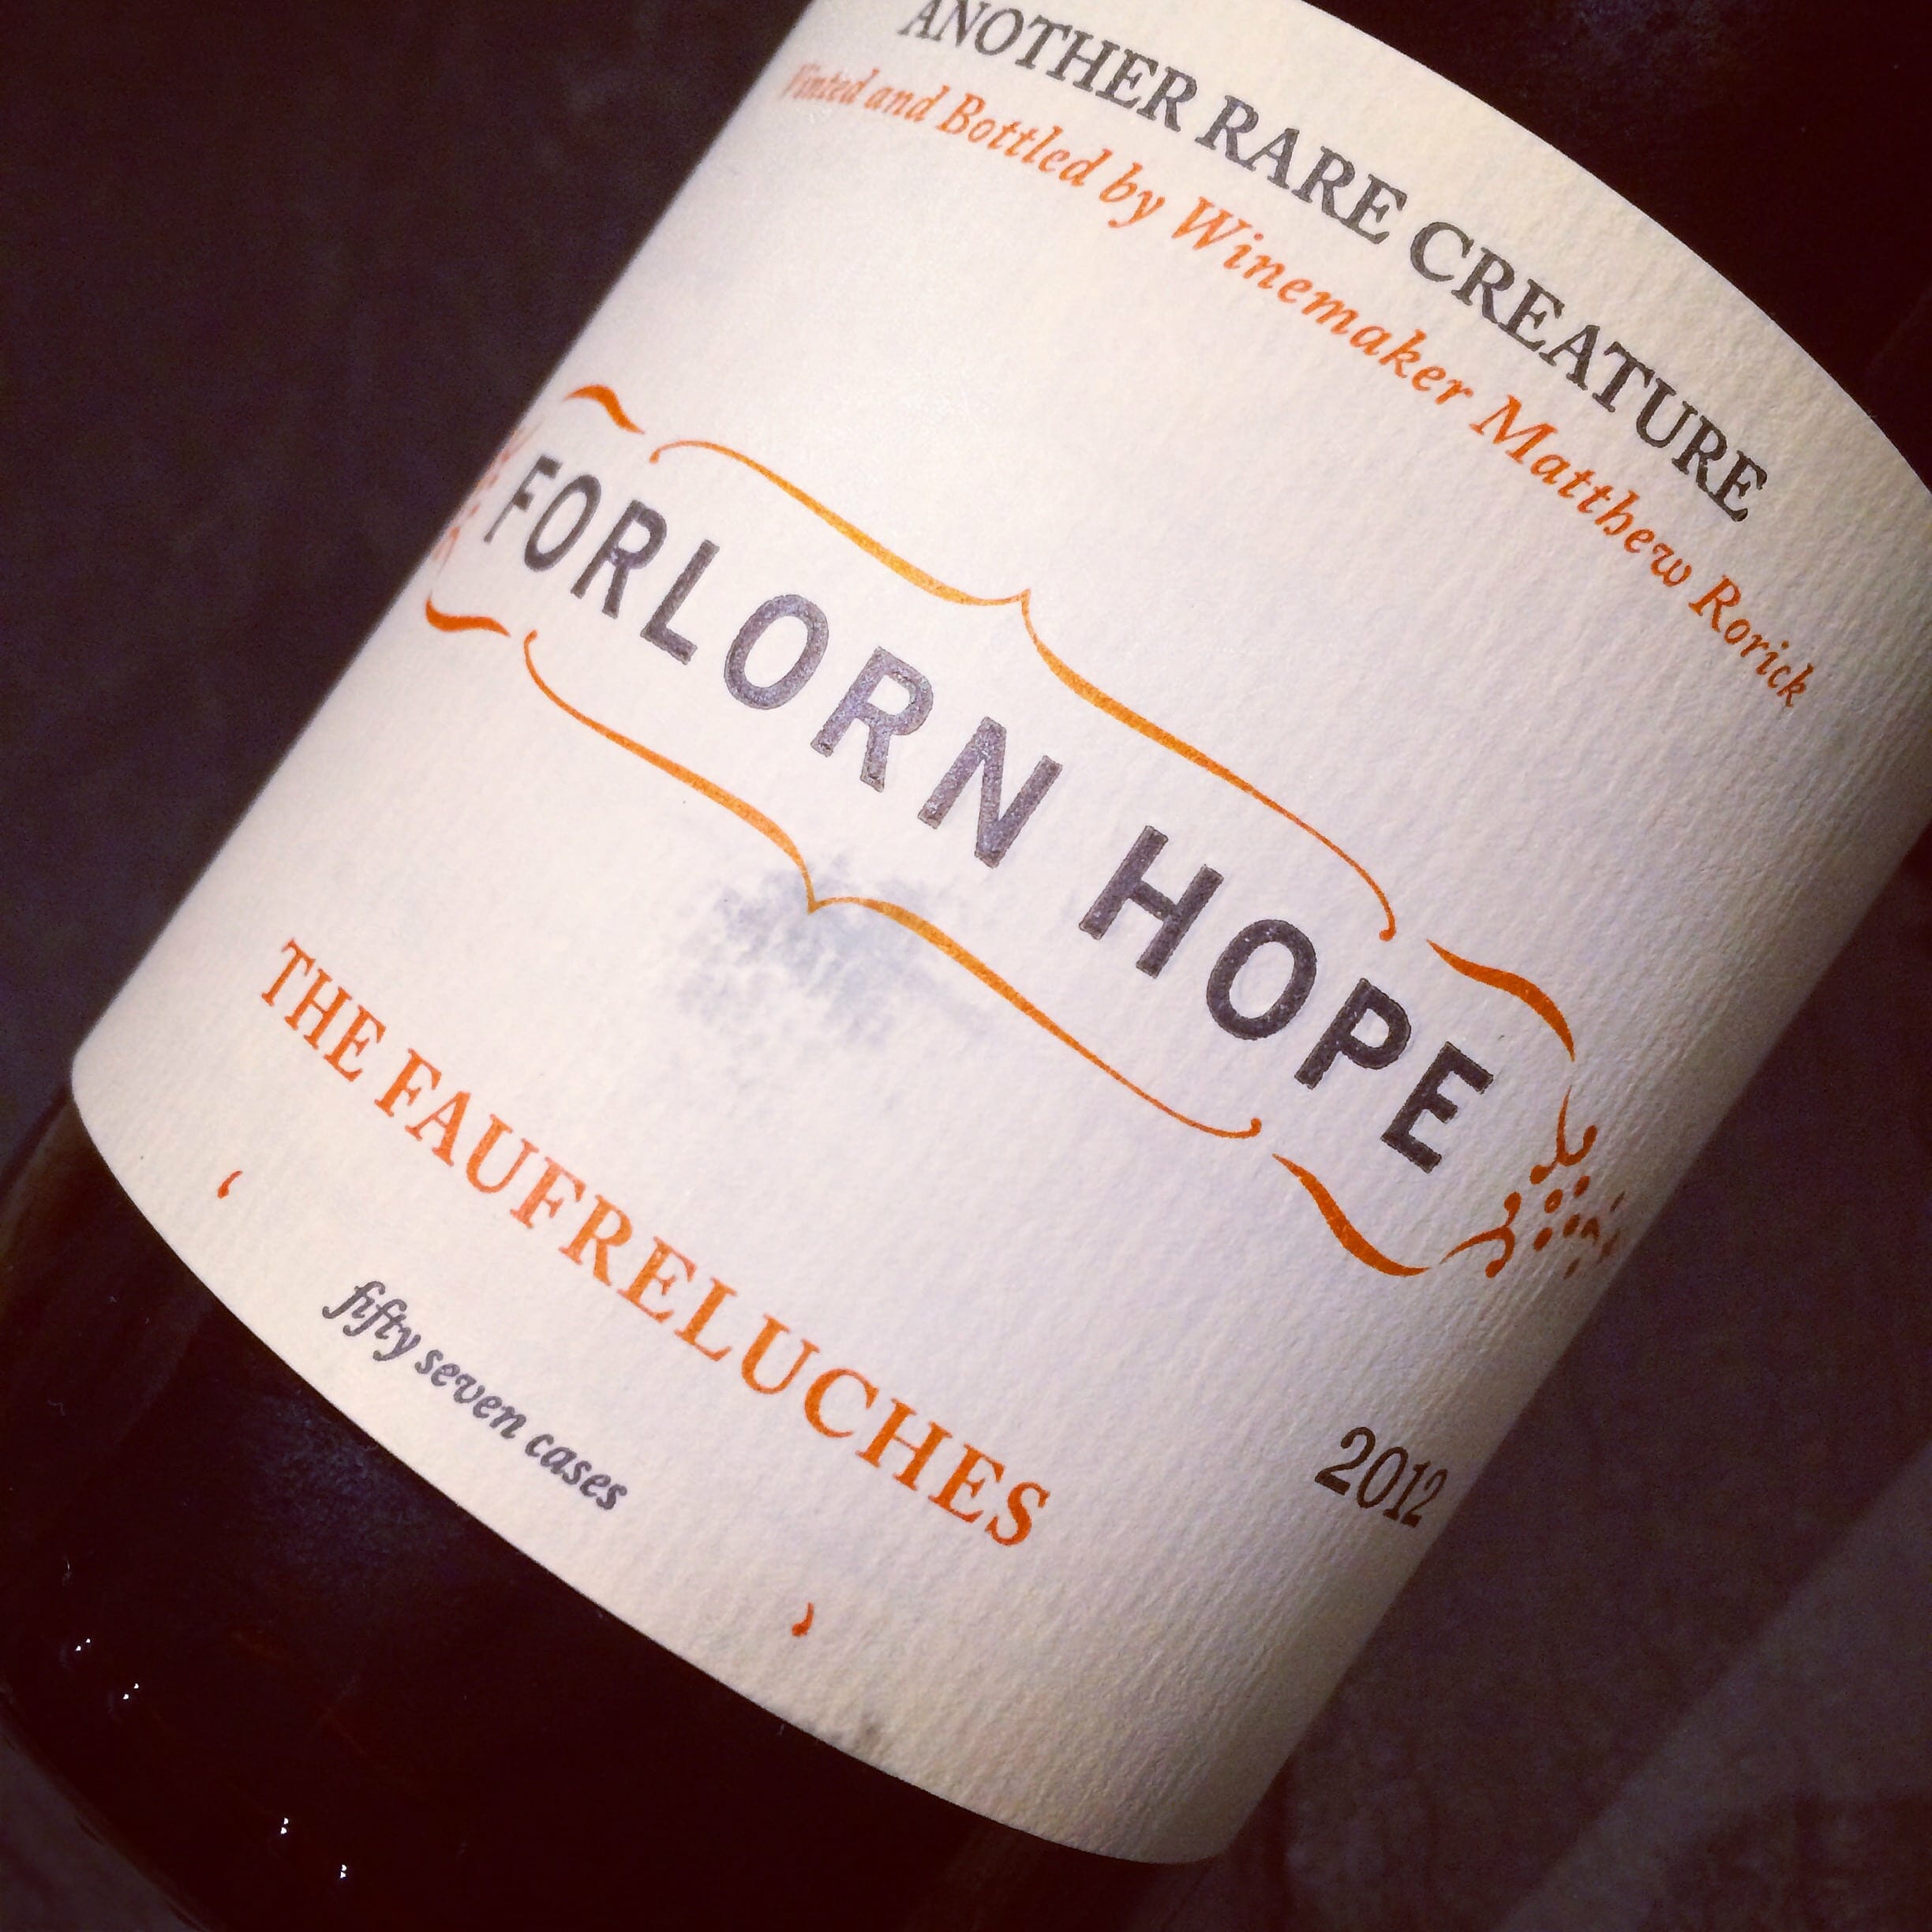 Forlorn Hope Another Rare Creature The Faufreluches Gewürztraminer 2012